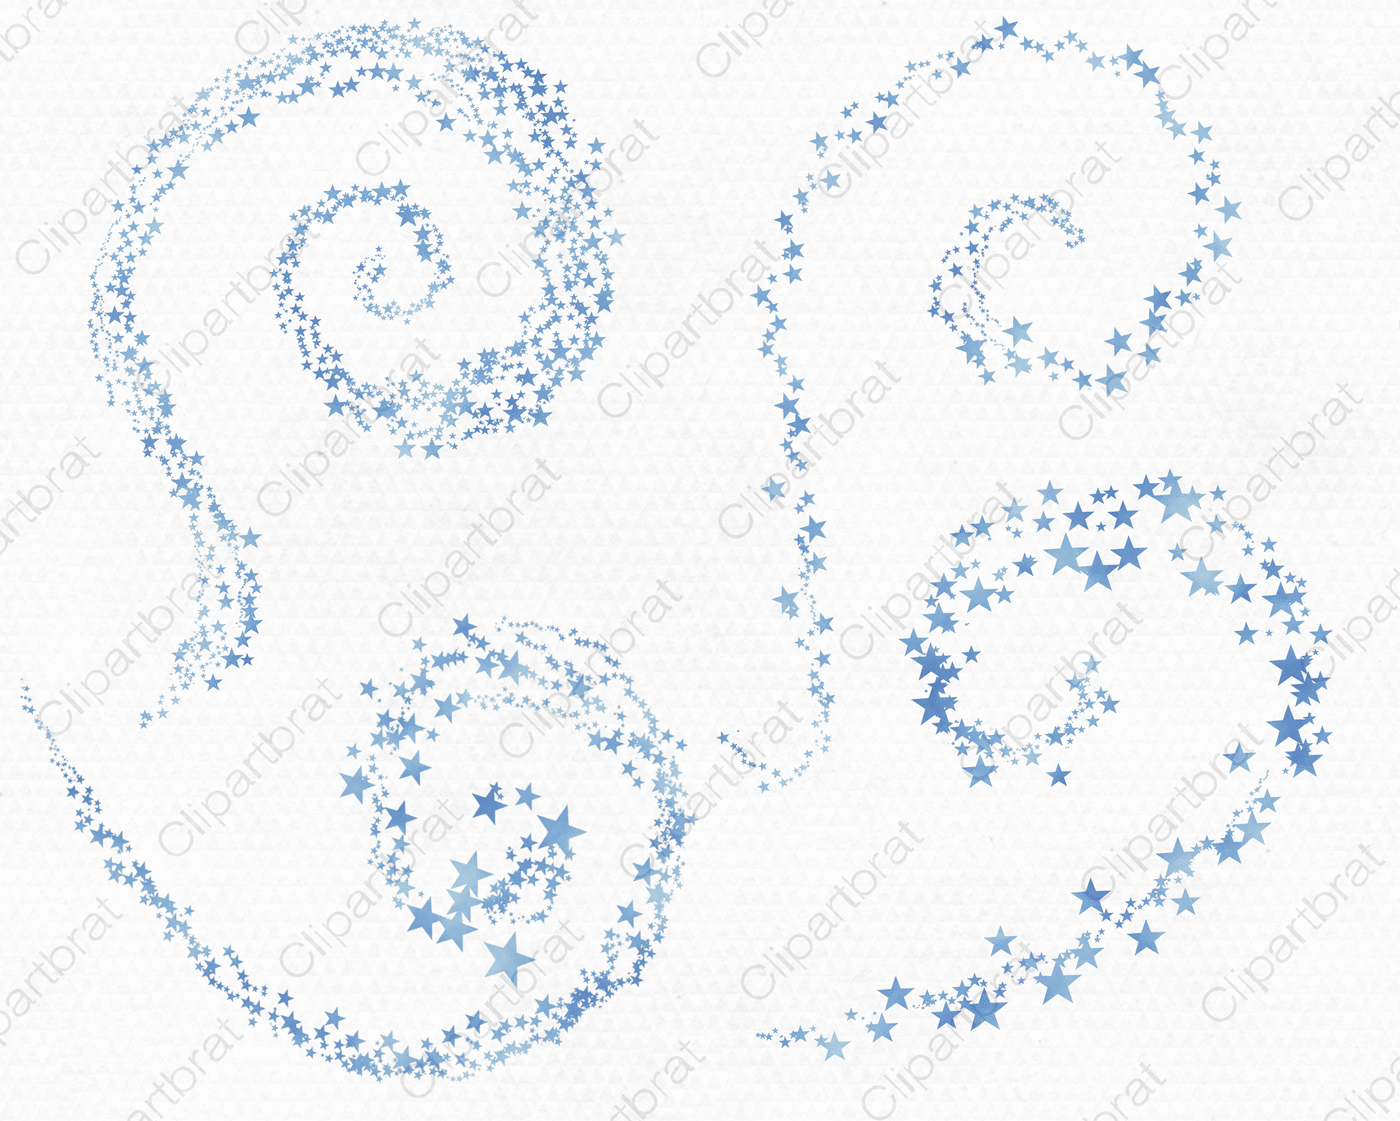 Light Blue Watercolor Swirling Star Trails Celestial Sky Clipart Graphics By Clipartbrat Thehungryjpeg Com